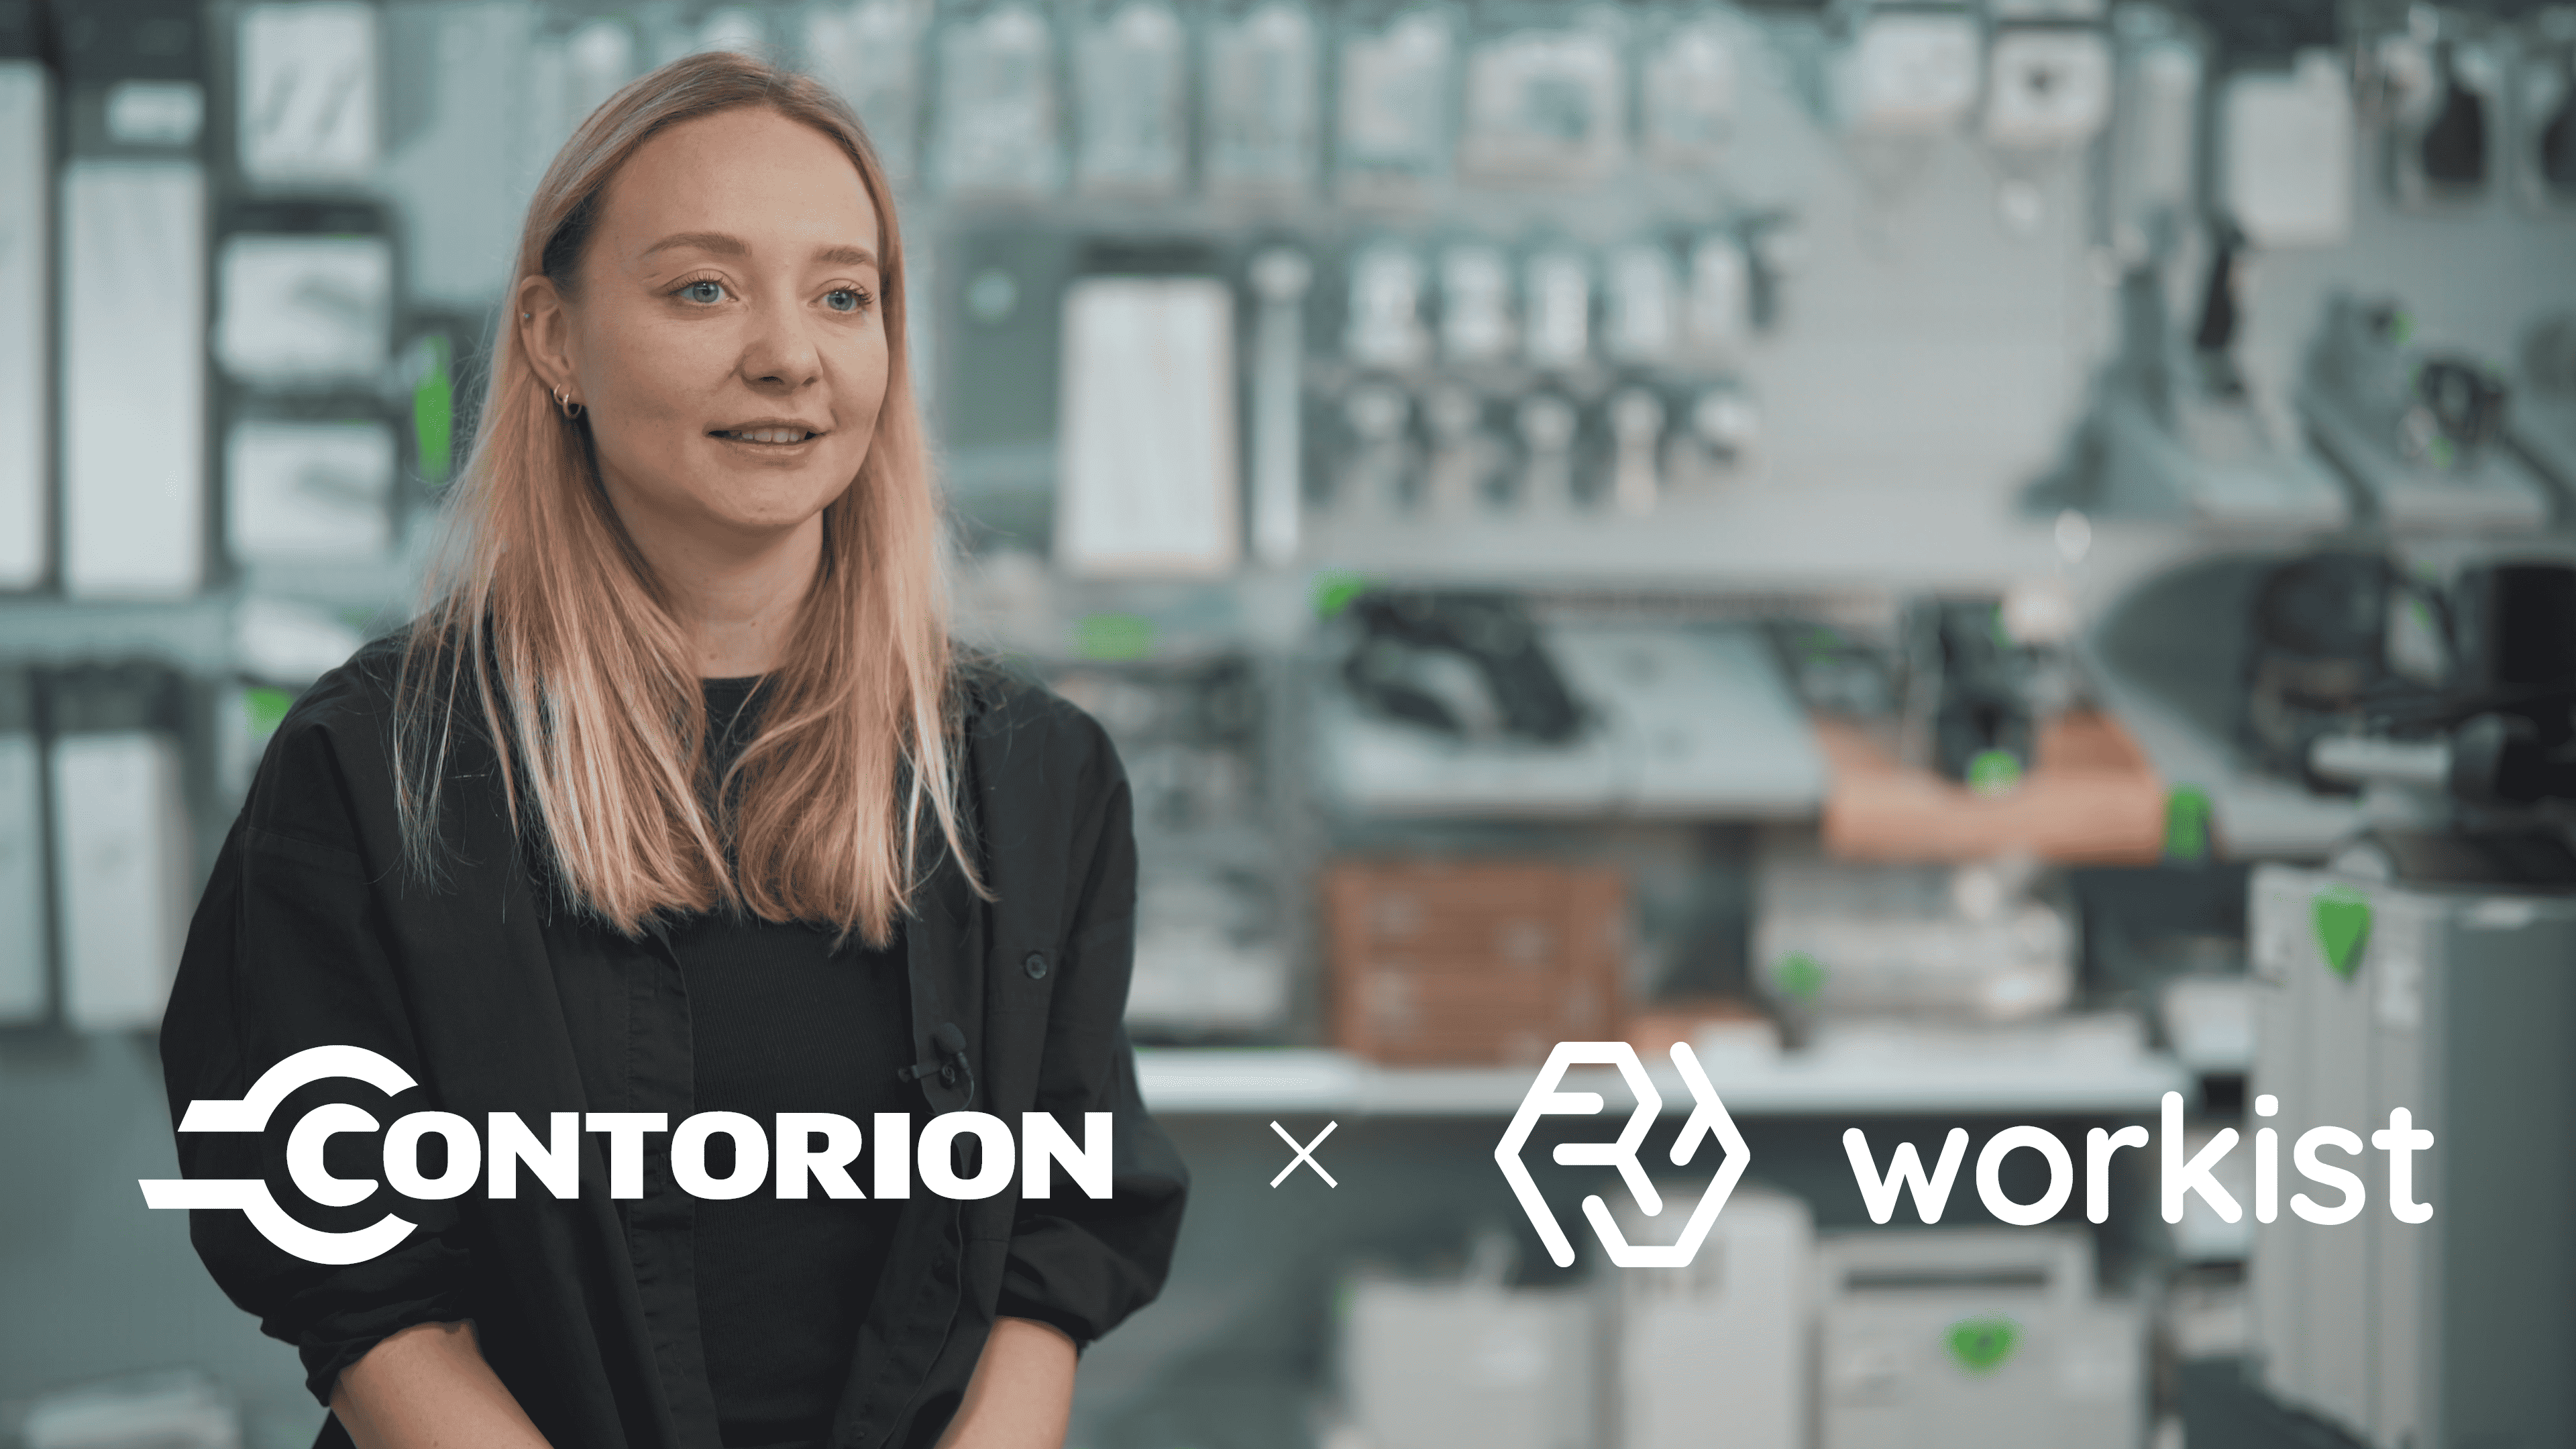 Valentina Yakupova at Contorion's warehouse with tools and supplies in the background, featuring the Contorion and Workist logos to symbolize their partnership.